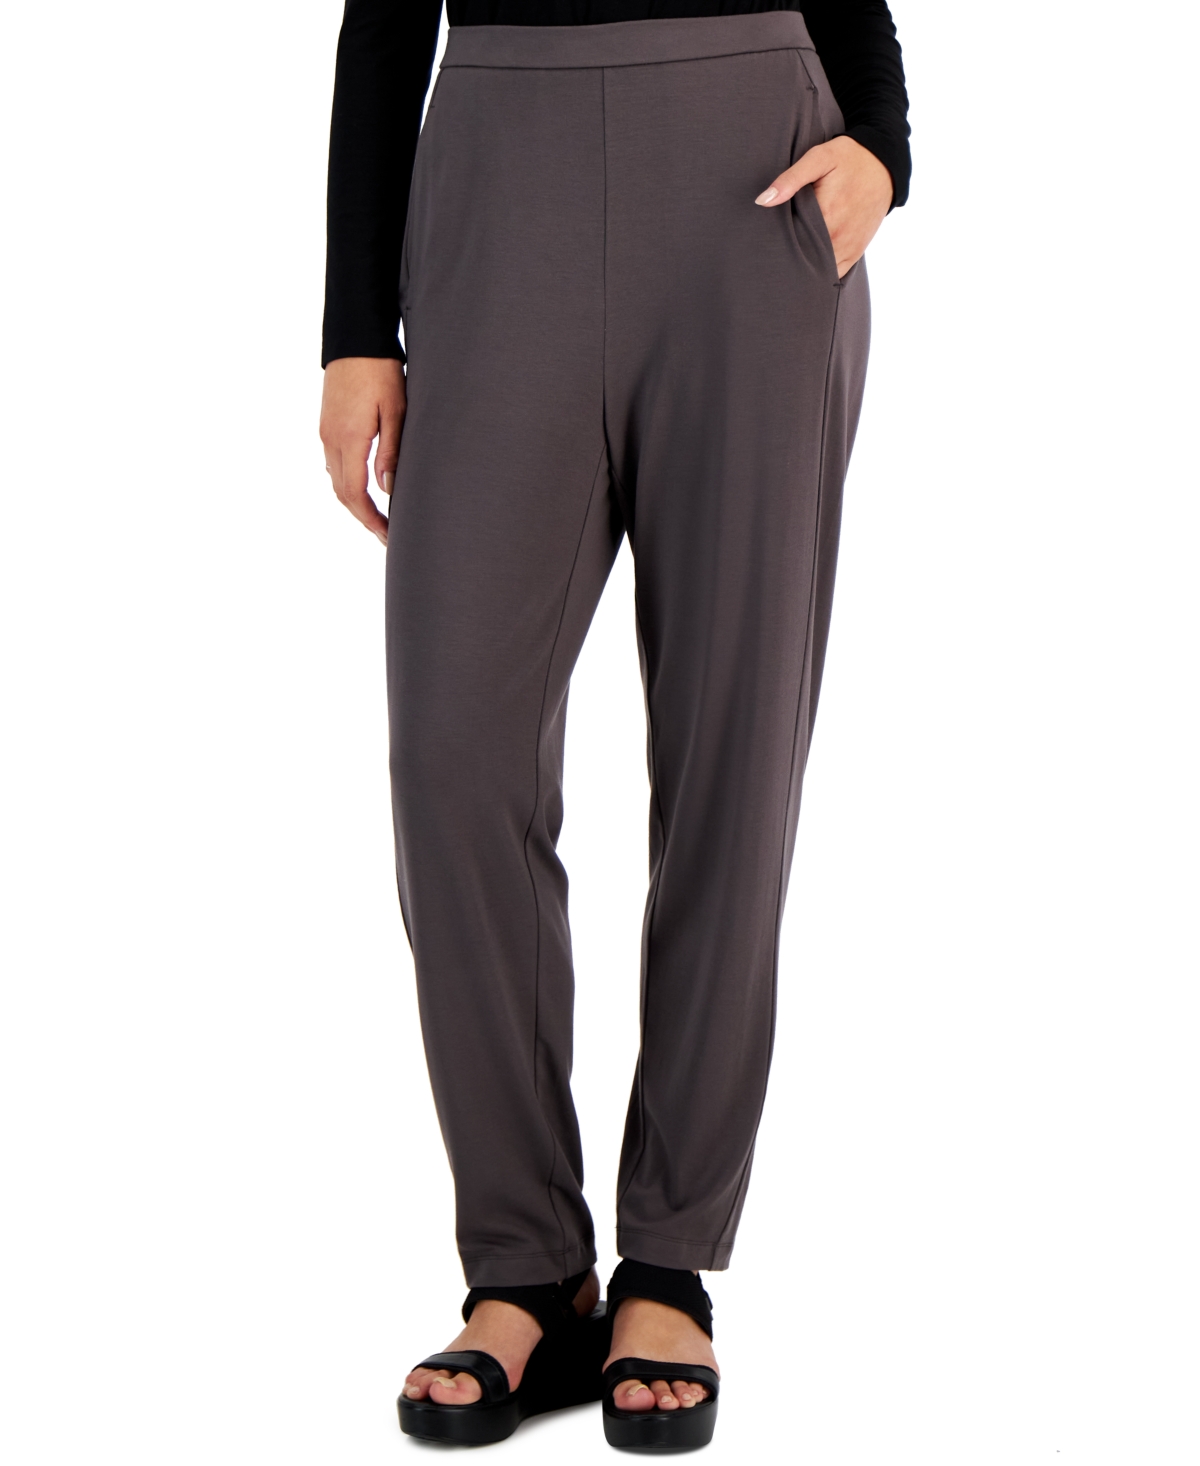 Eileen Fisher Women's Pull-On Slouch Ankle Pants